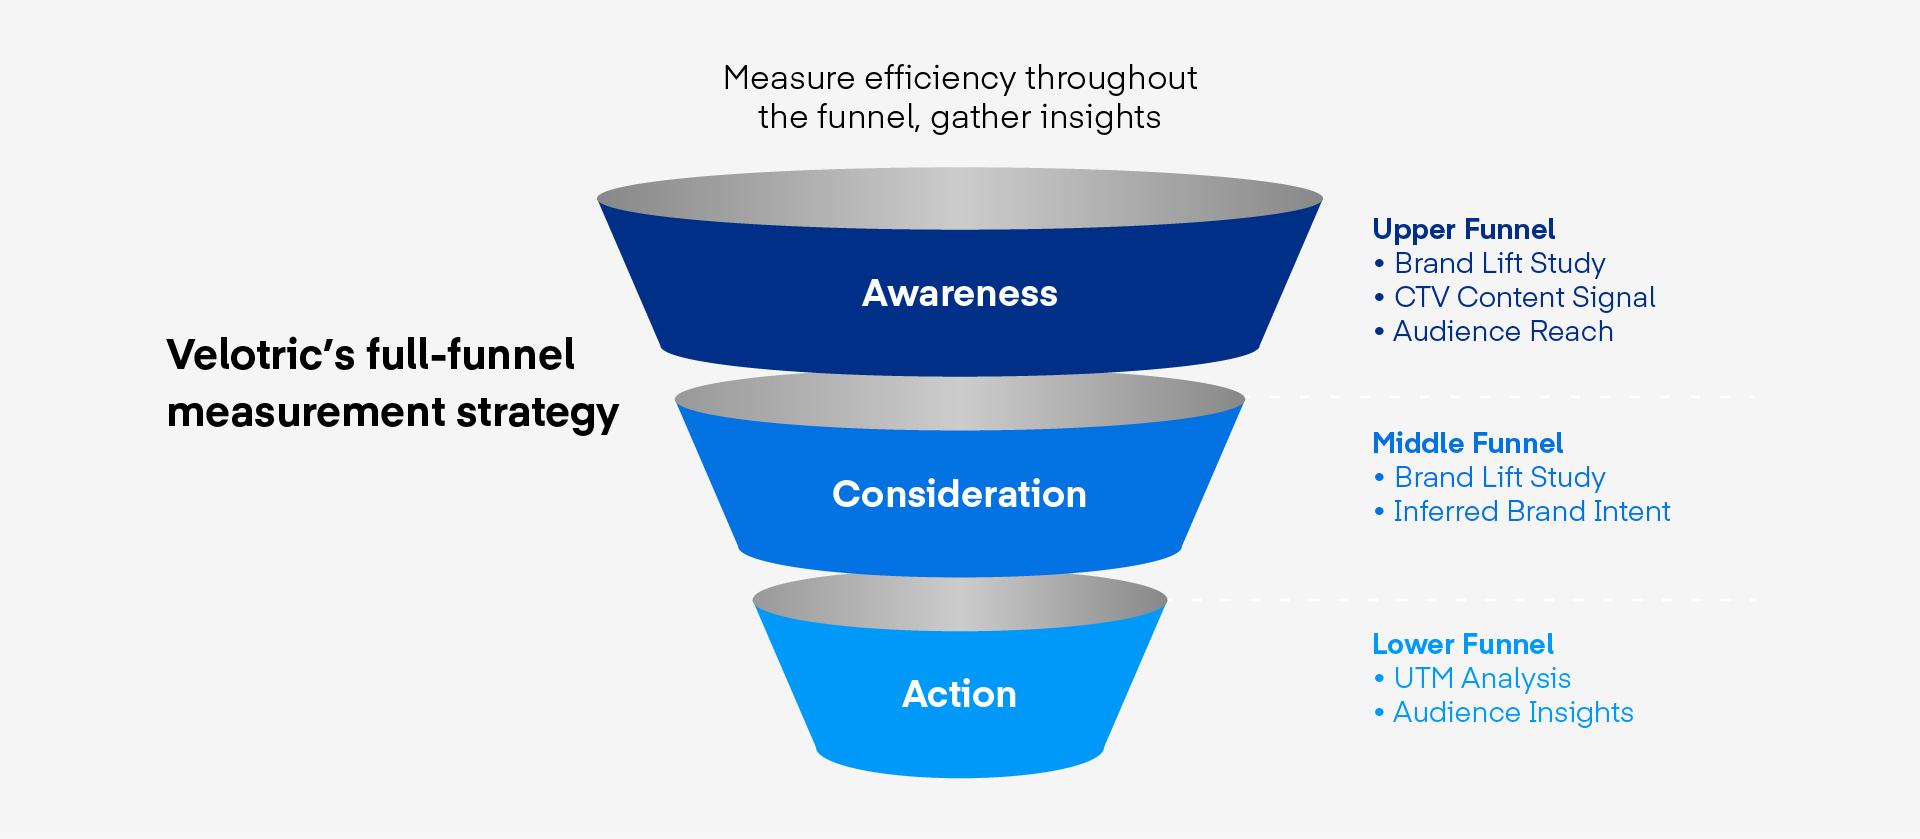 Graphic shows Velotric's full-funnel measurement strategy, which includes: Awareness (upper funnel); Consideration (middle funnel); Action (lower funnel)